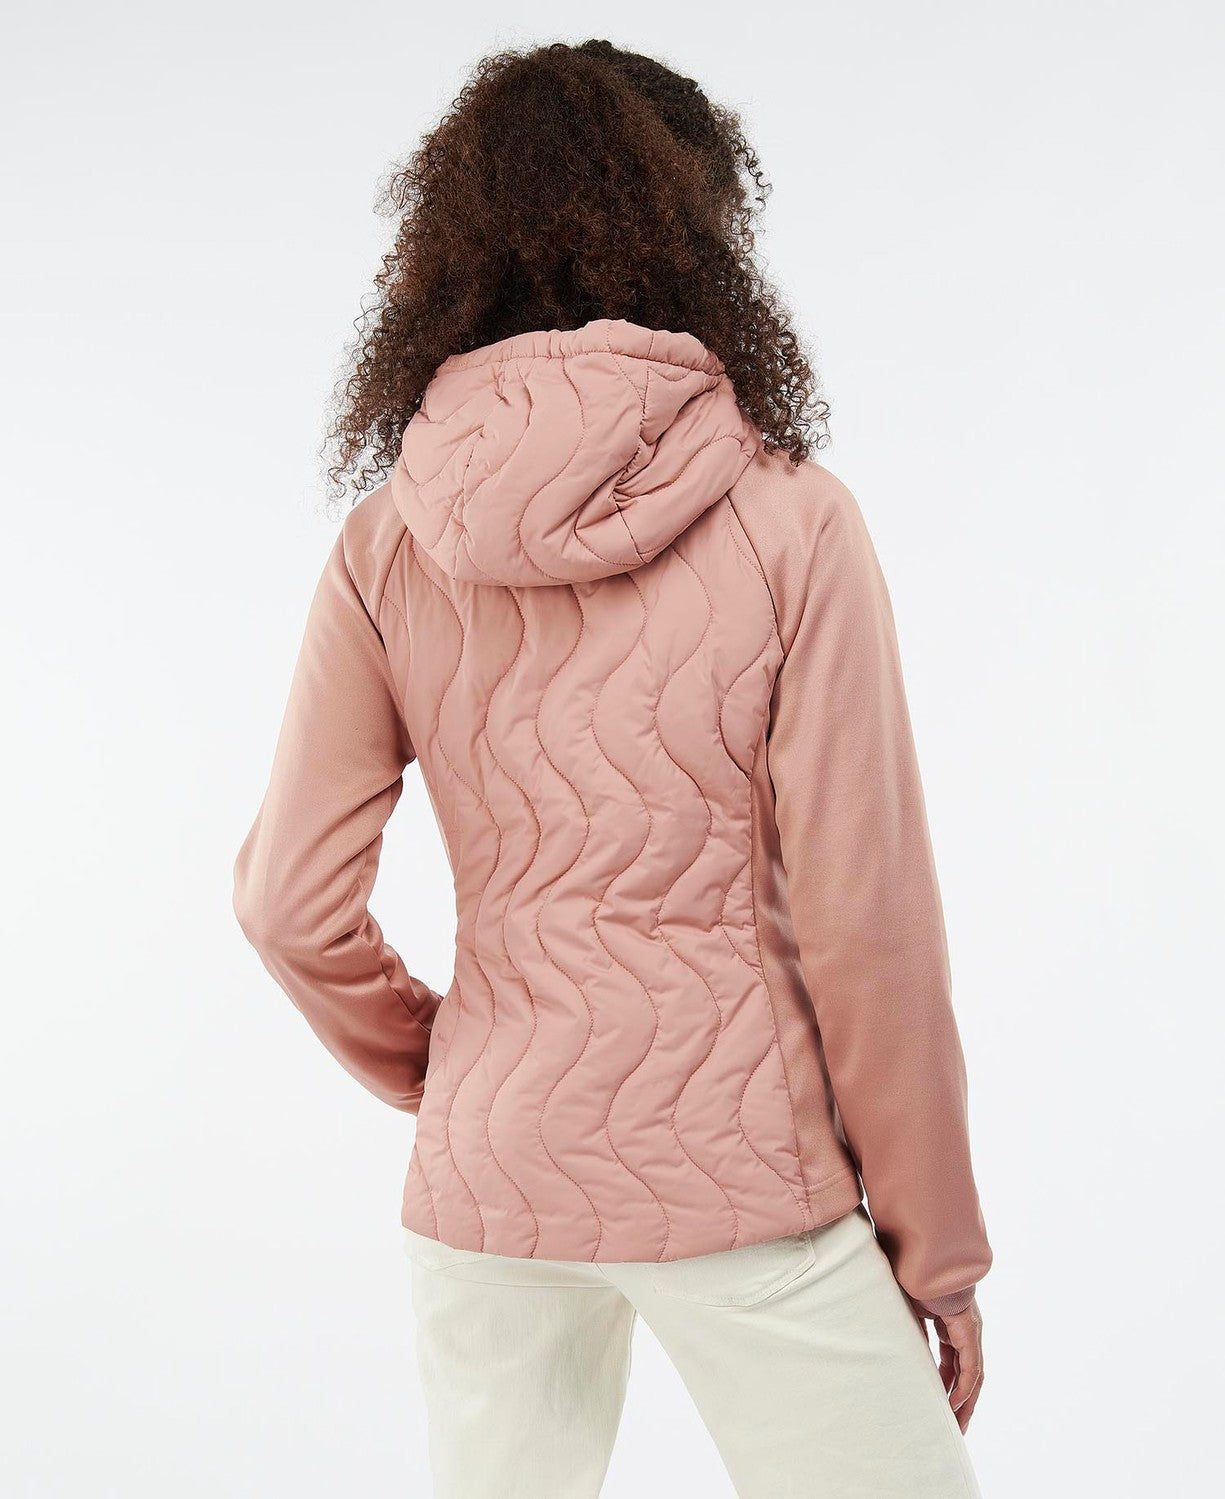 Barbour Strathmore Sweater - Soft Coral